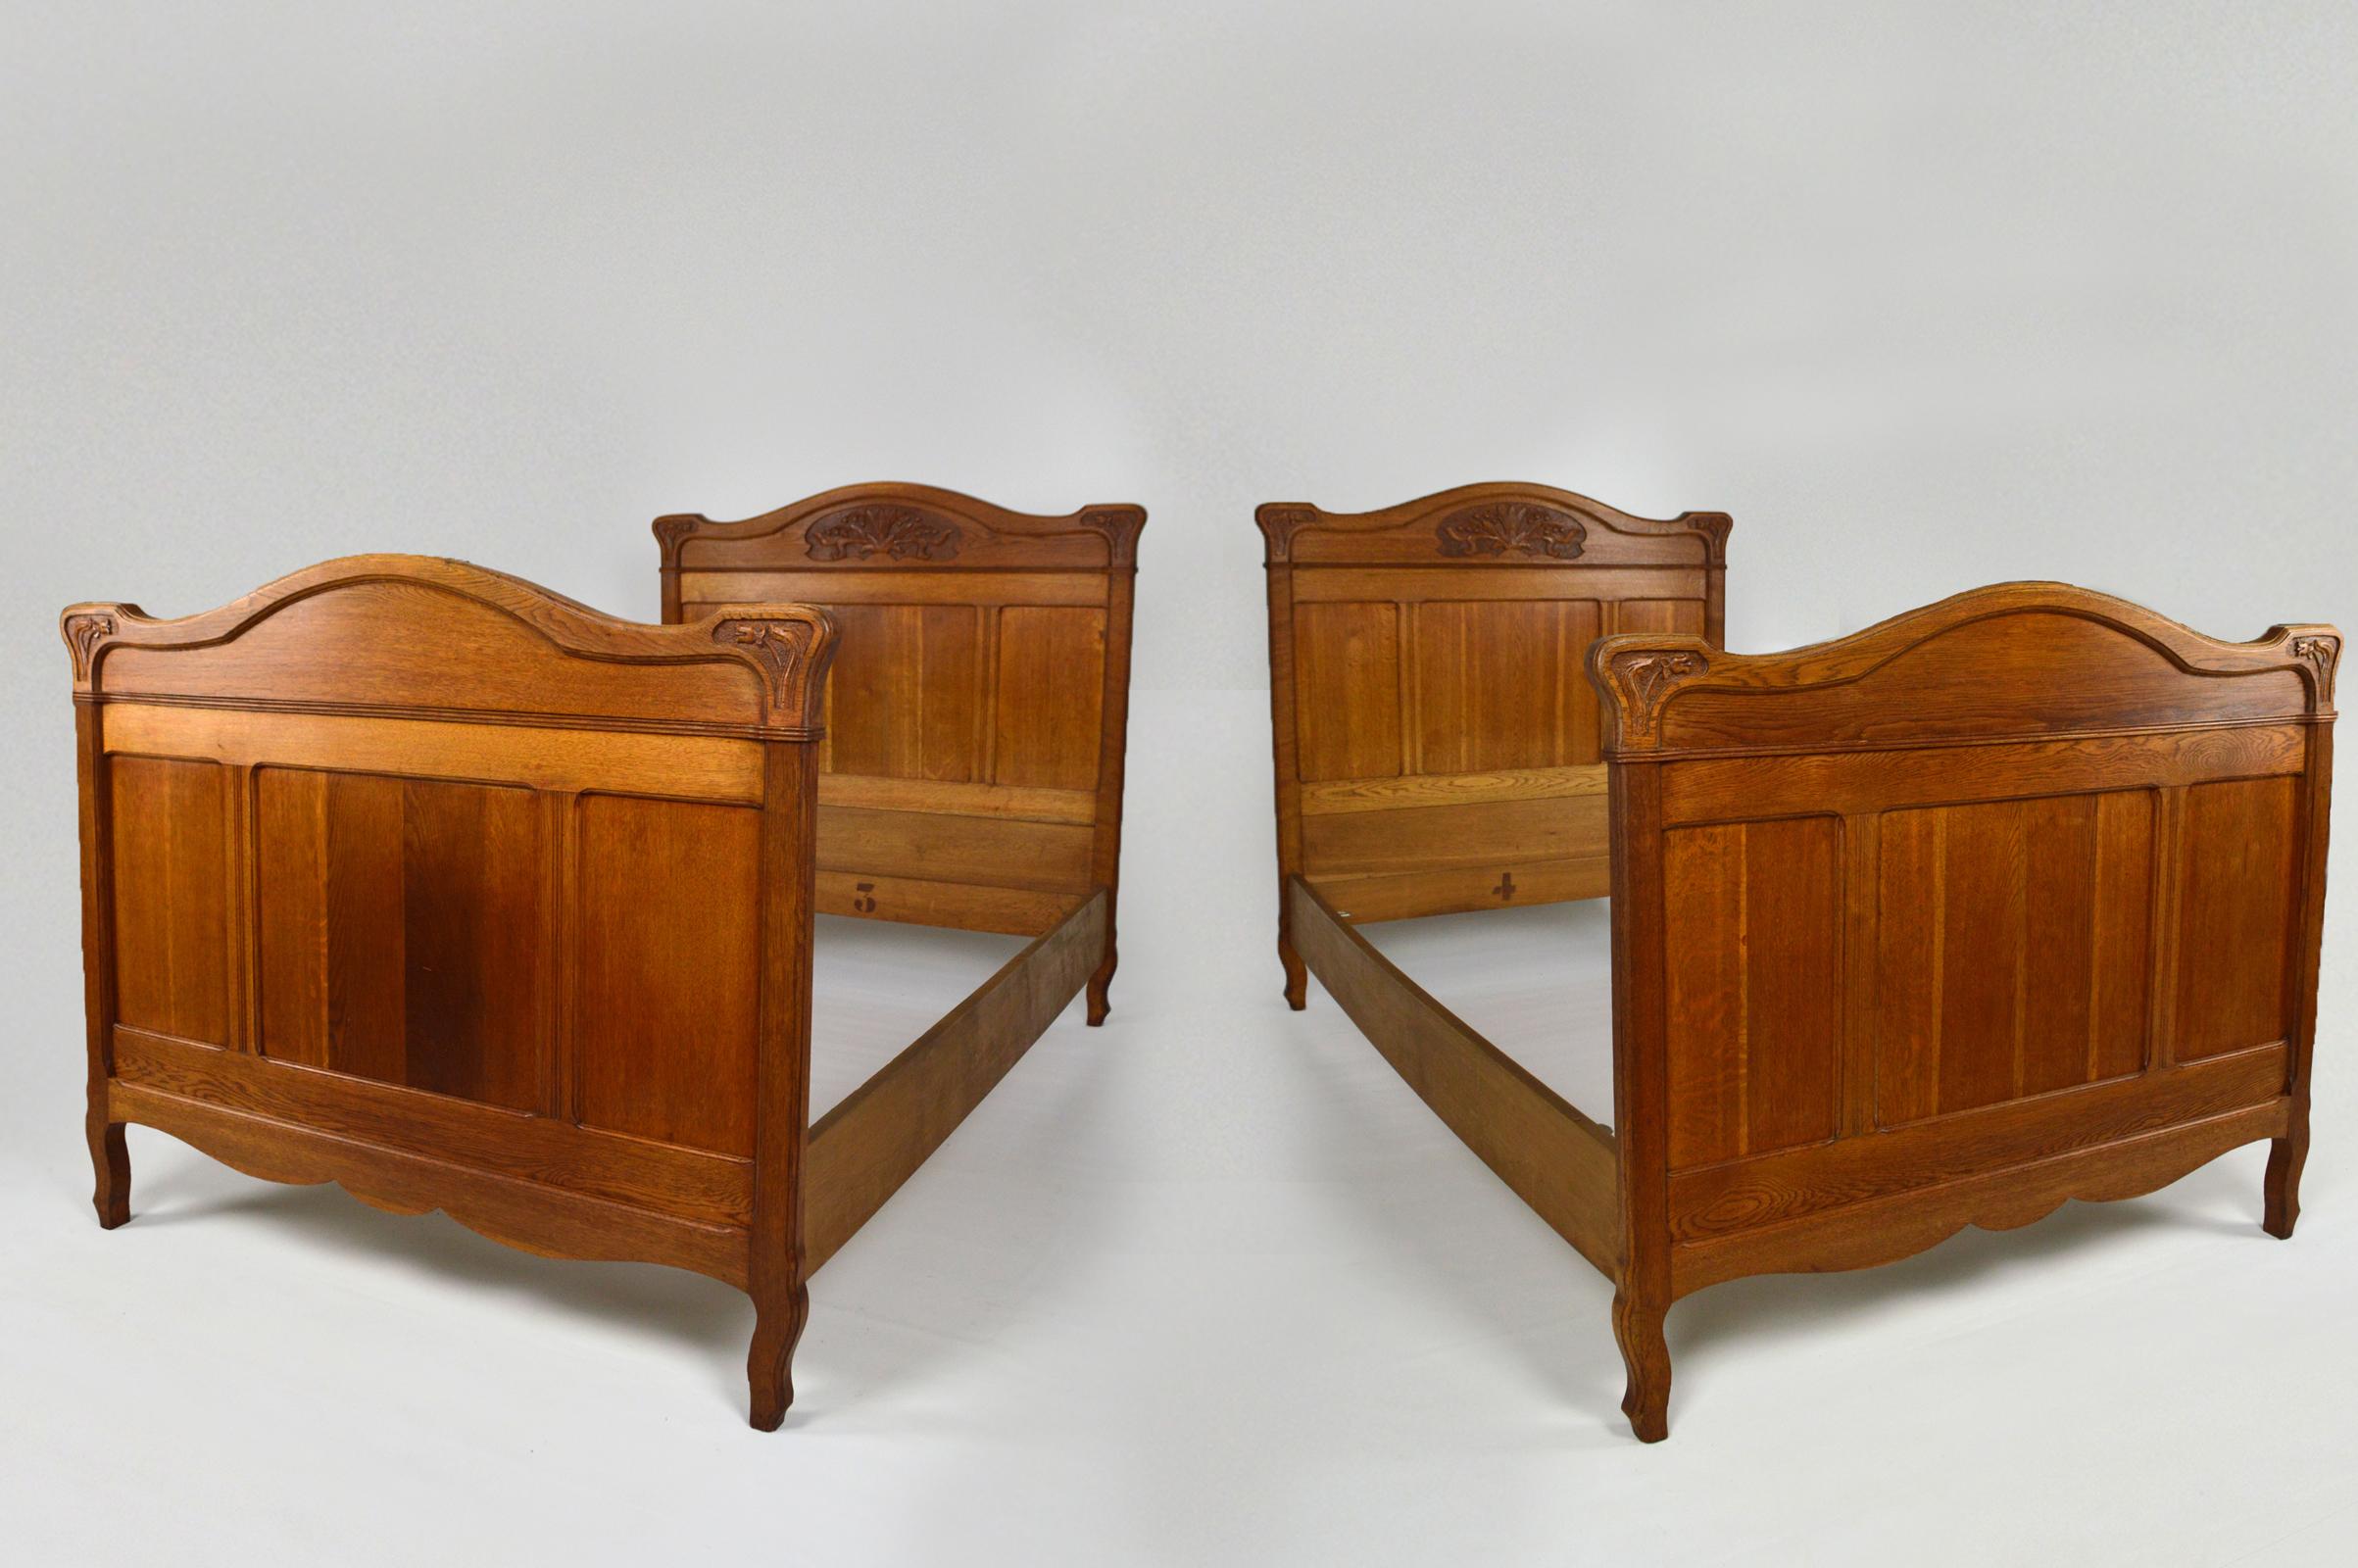 French Art Nouveau Twin Beds in Carved Oak, France, circa 1910 For Sale